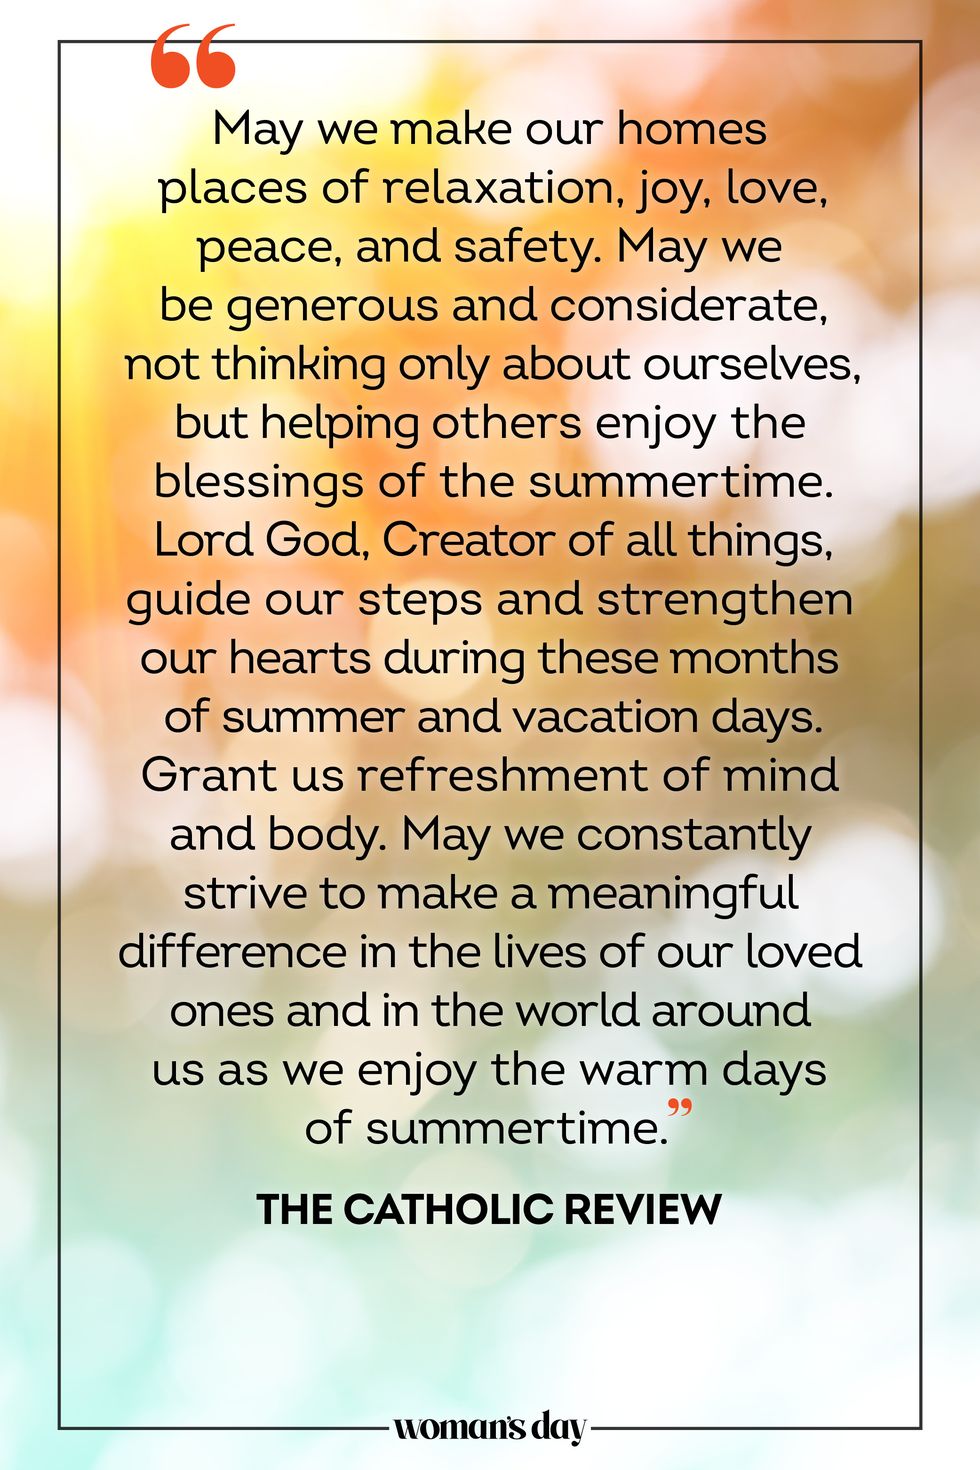 summer prayers and blessings to recite during the warmer months